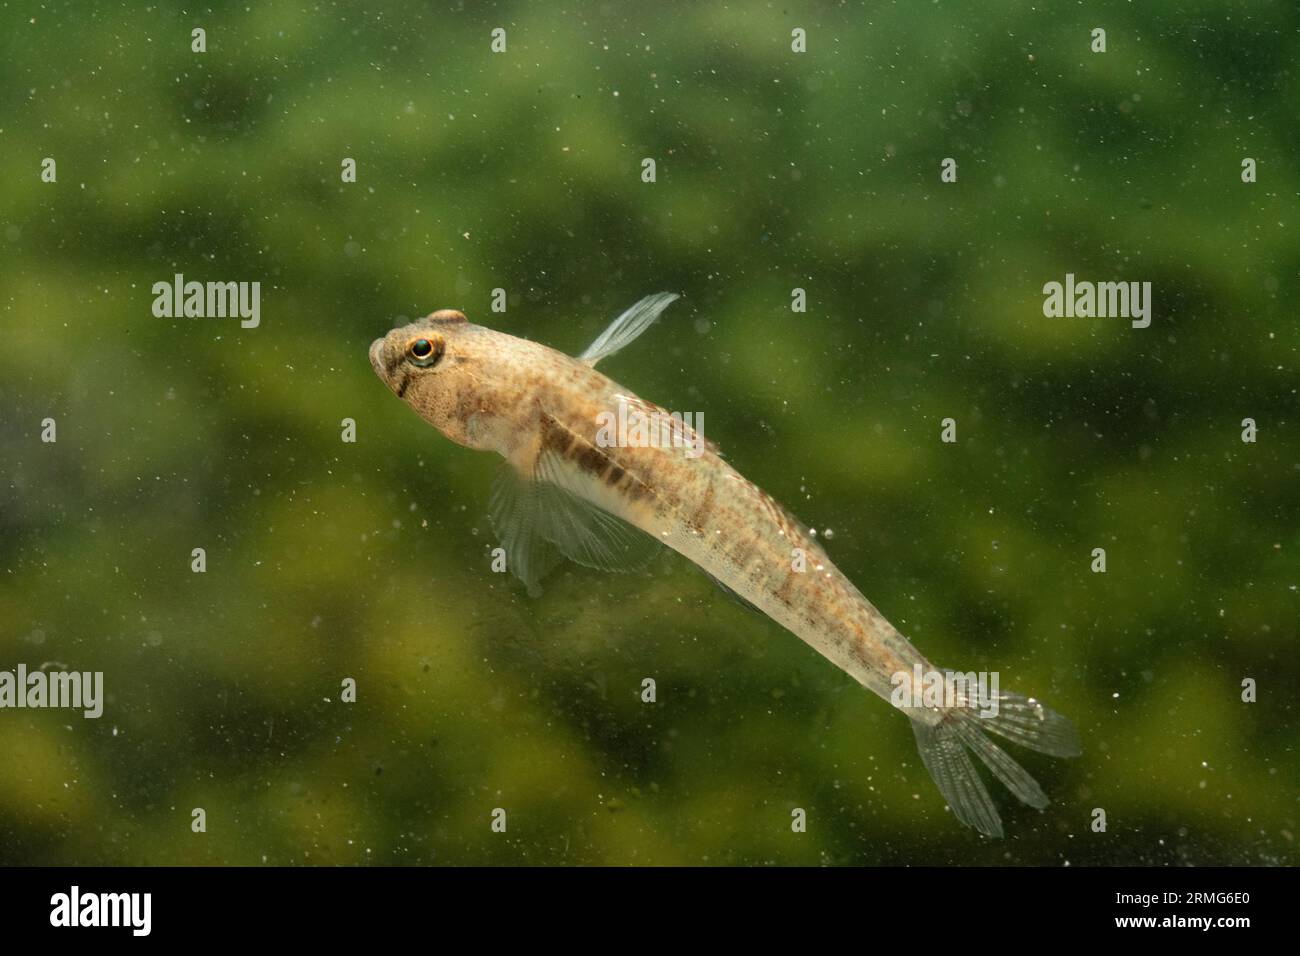 small sand goby fish Stock Photo